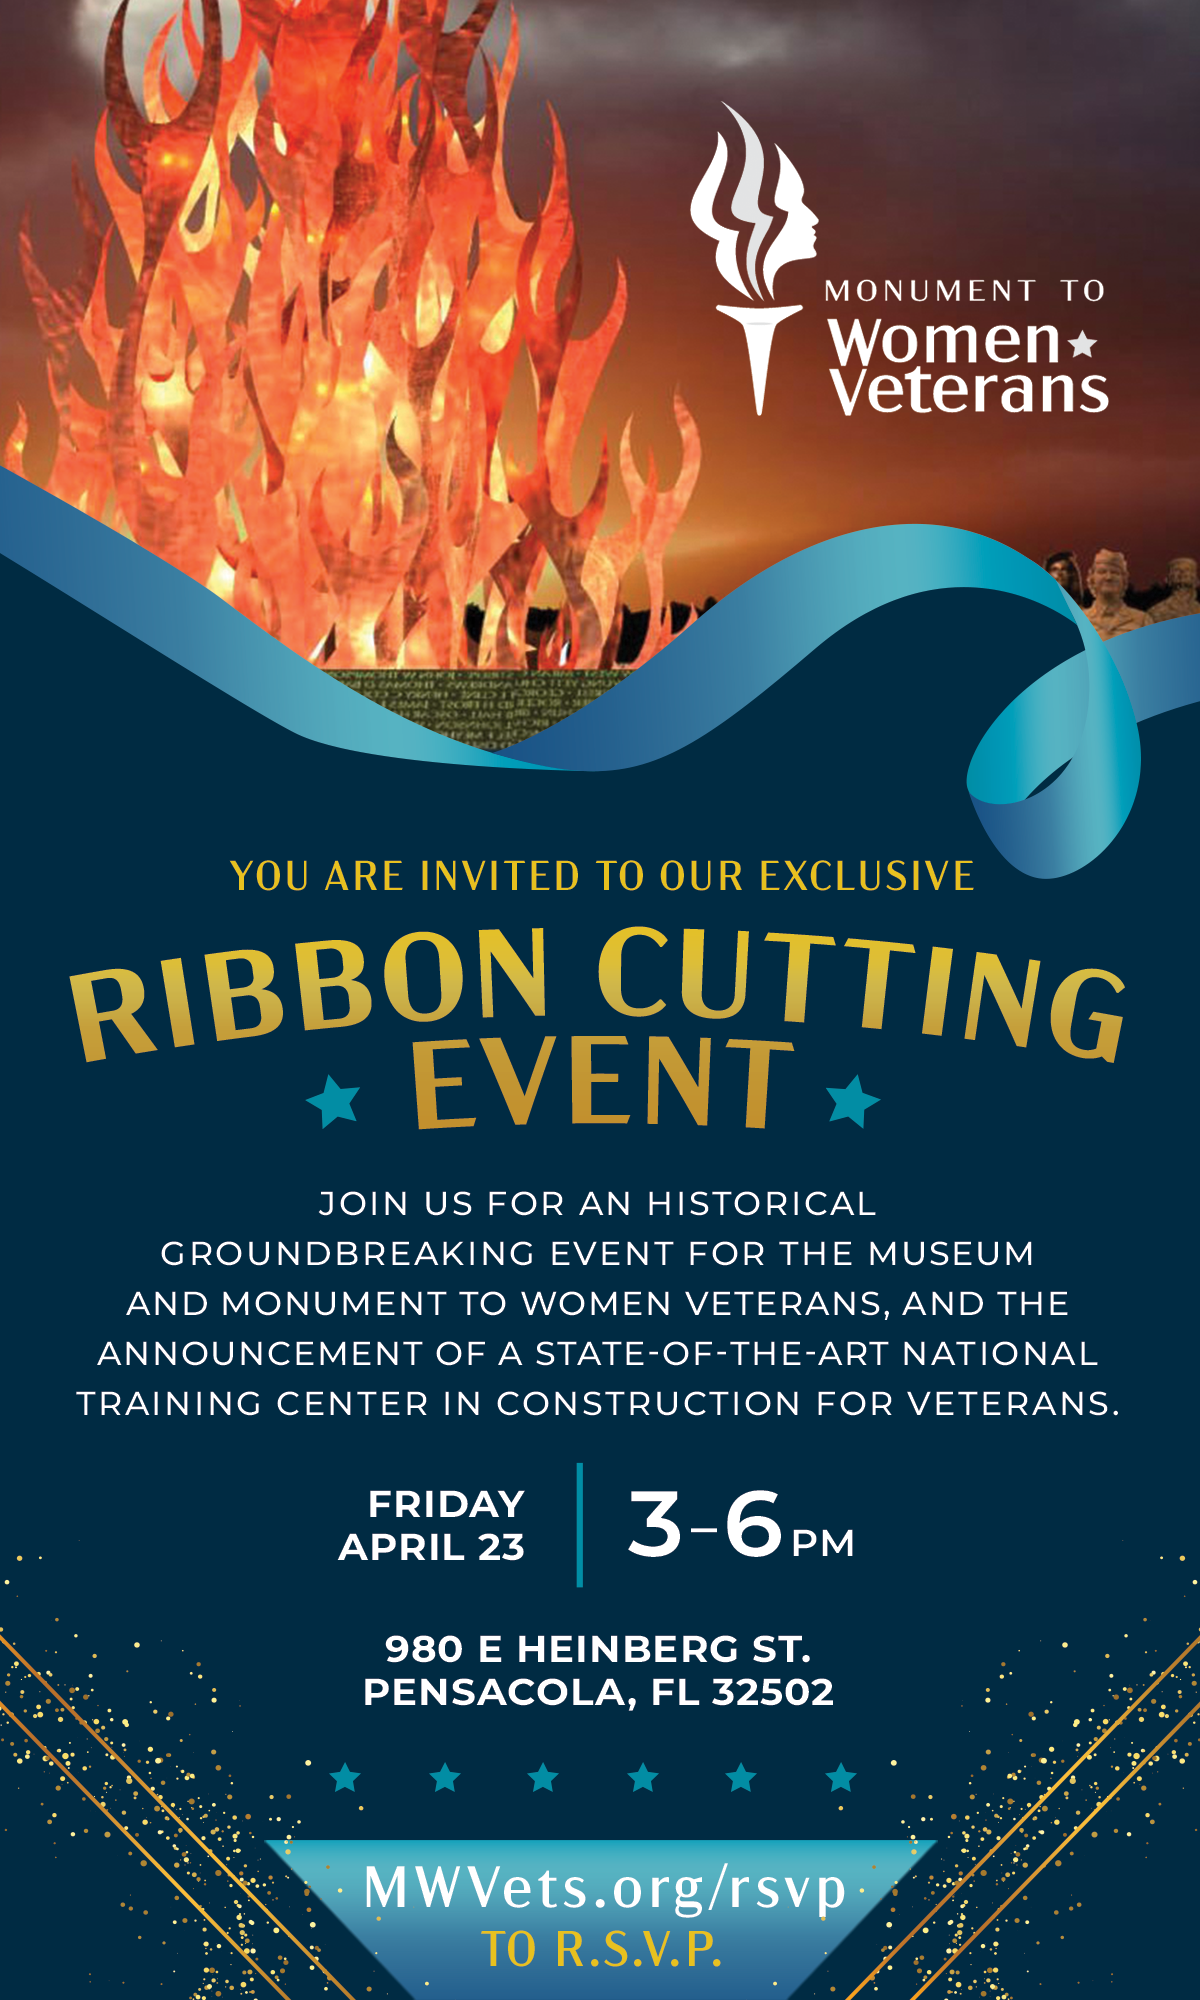 Join this public groundbreaking event for the Monument to Women Veterans and national training center.